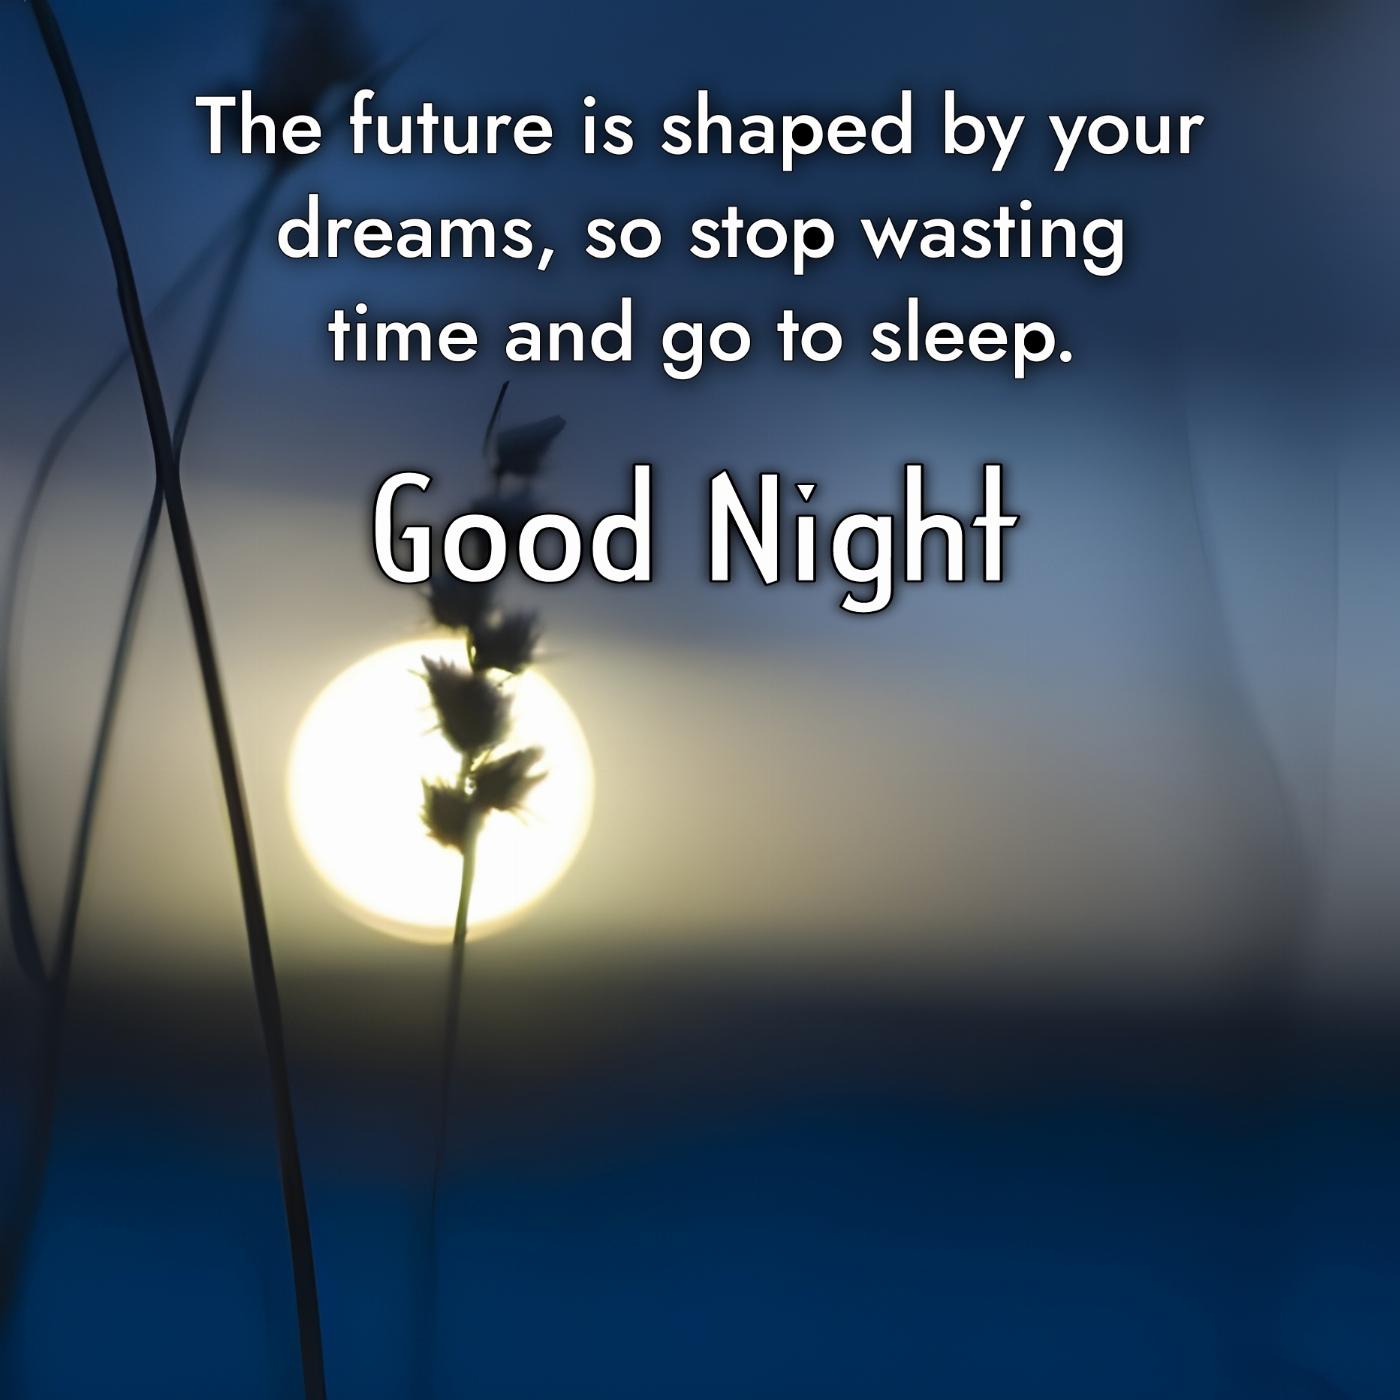 The future is shaped by your dreams so stop wasting time